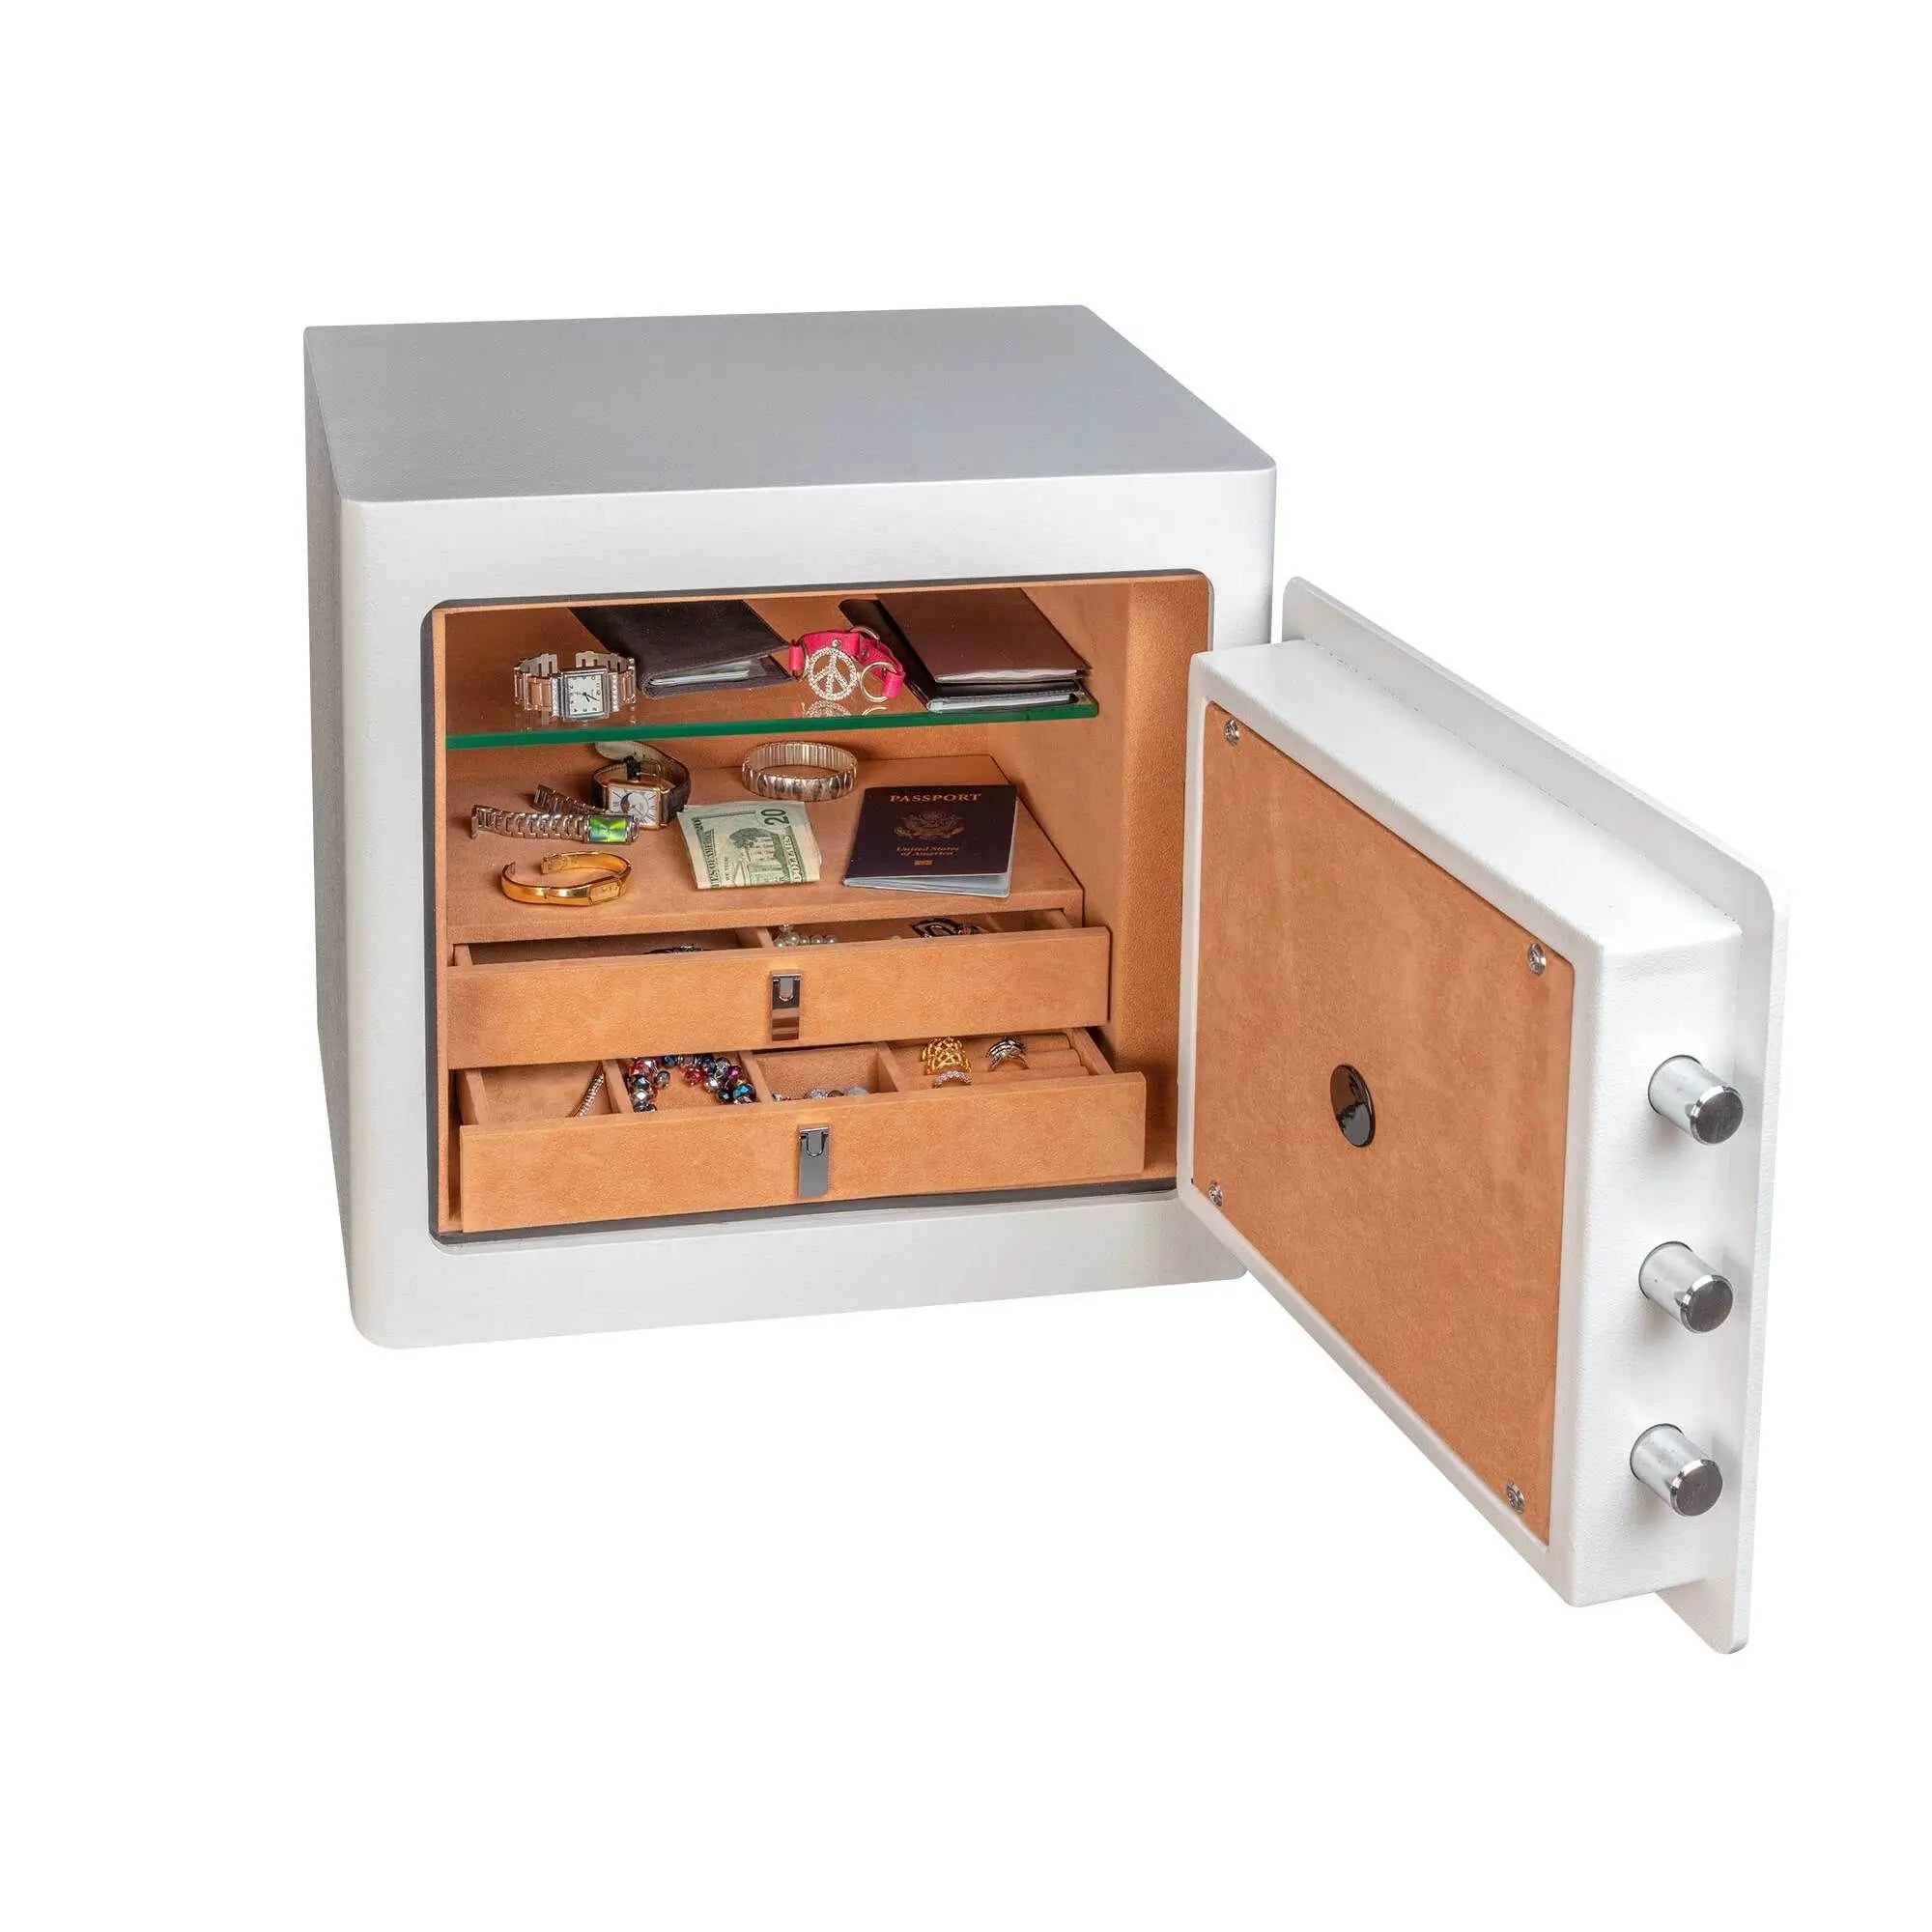 Gardall JS1718 Jewelry Safe with Drawers